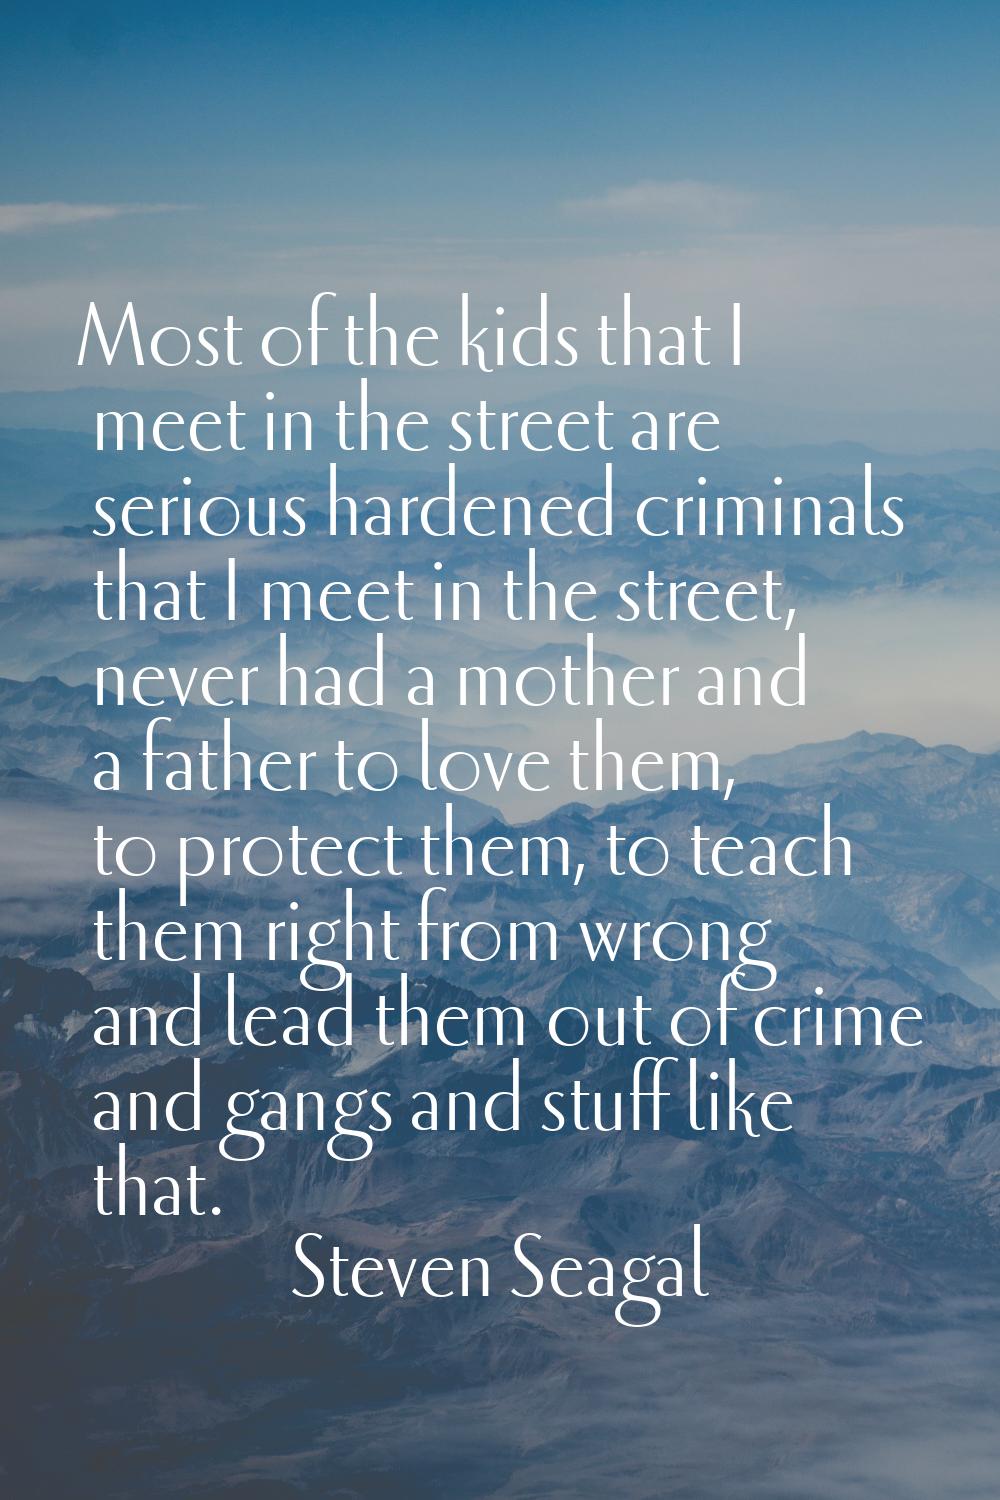 Most of the kids that I meet in the street are serious hardened criminals that I meet in the street